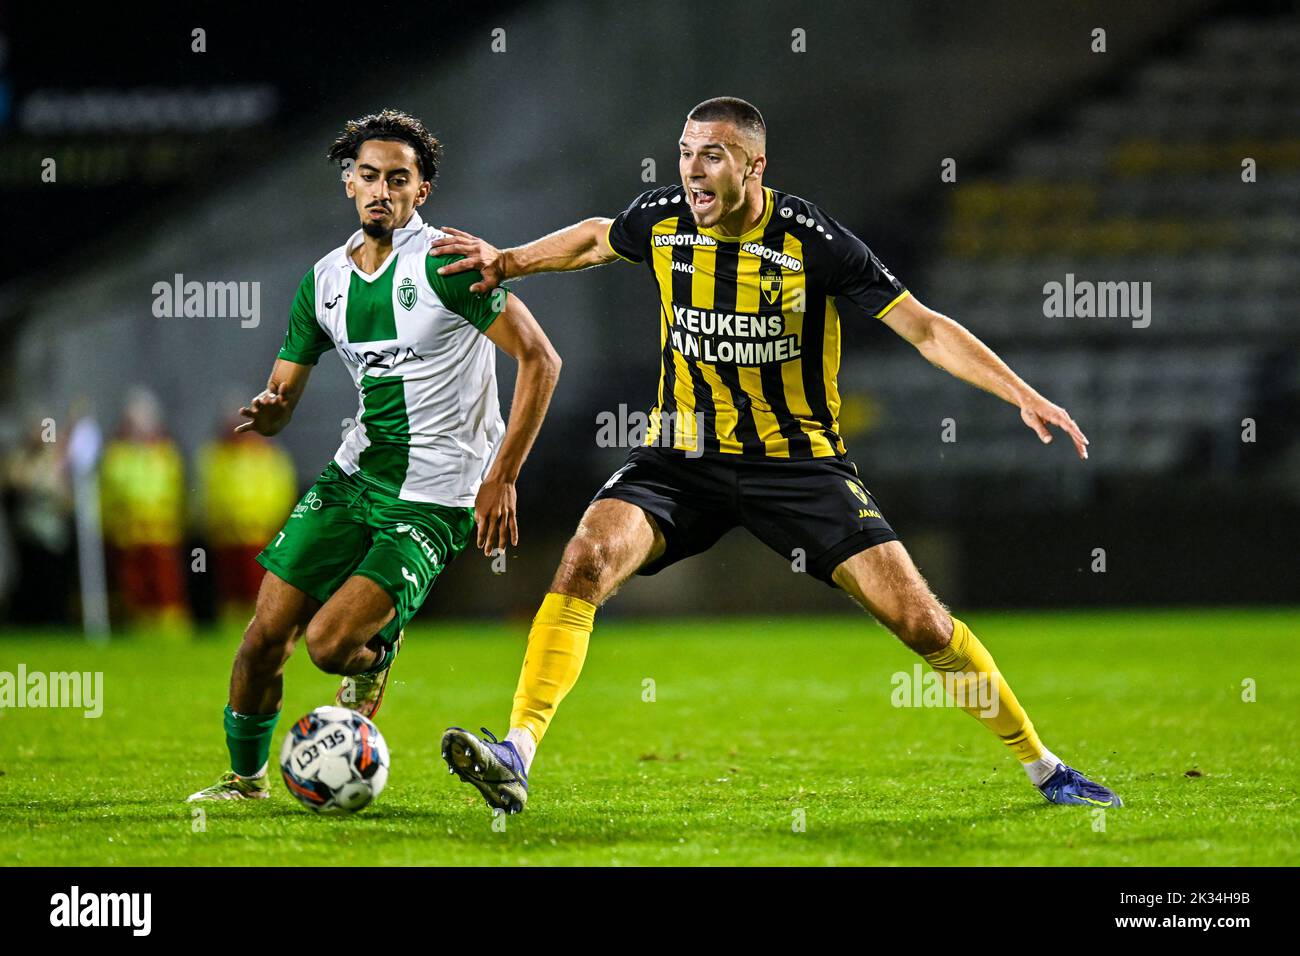 Racing's Yanis Mrani and Lierse's Joederick Pupe pictured in action during a soccer game between Lierse Kempenzonen and Koninklijke Racing Club Mechelen, Saturday 24 September 2022 in Lier, in the fifth round of the 'Croky Cup' Belgian cup. BELGA PHOTO TOM GOYVAERTS Stock Photo